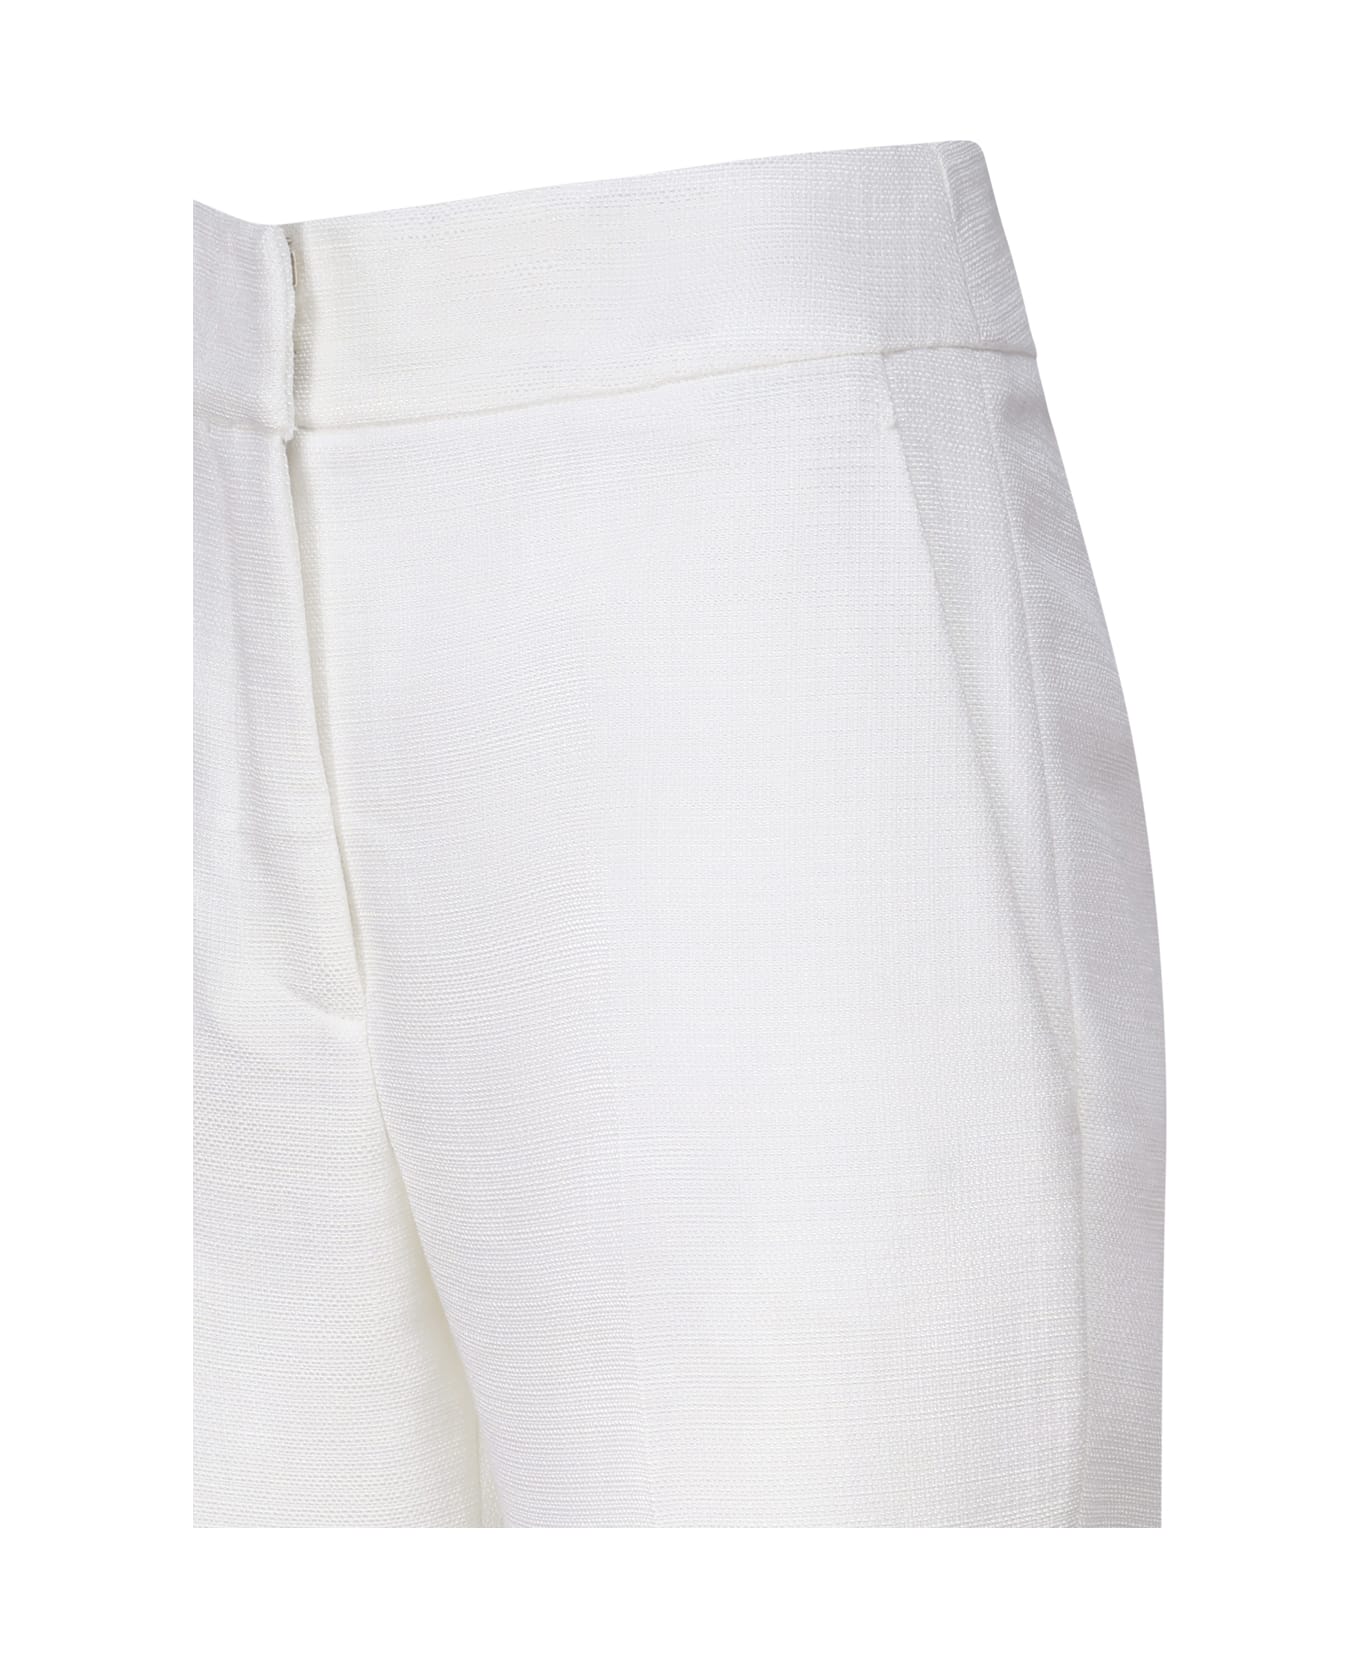 Genny Viscose Tailored Pants - White